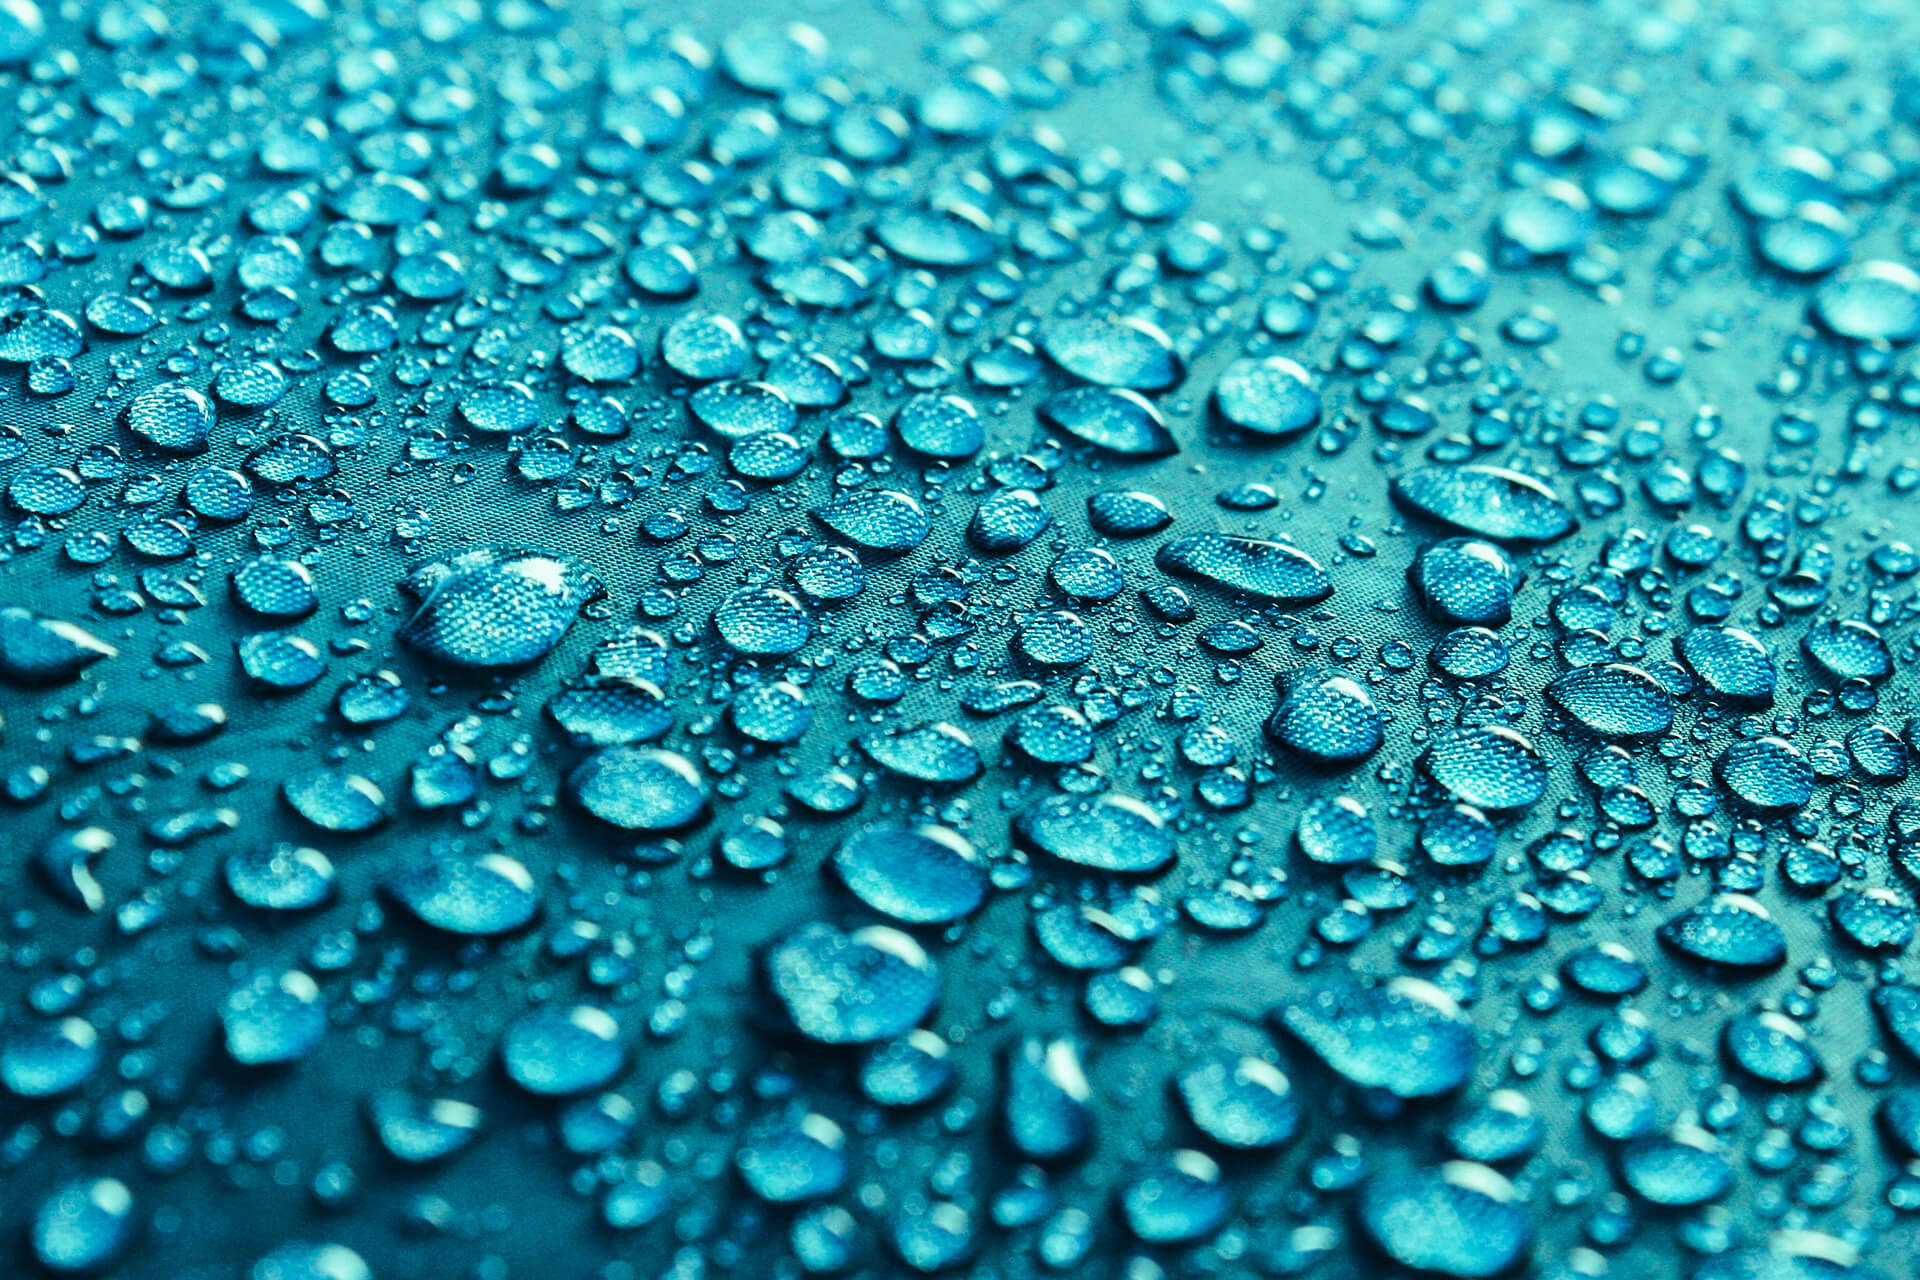 Water droplets on TPU laminated fabric